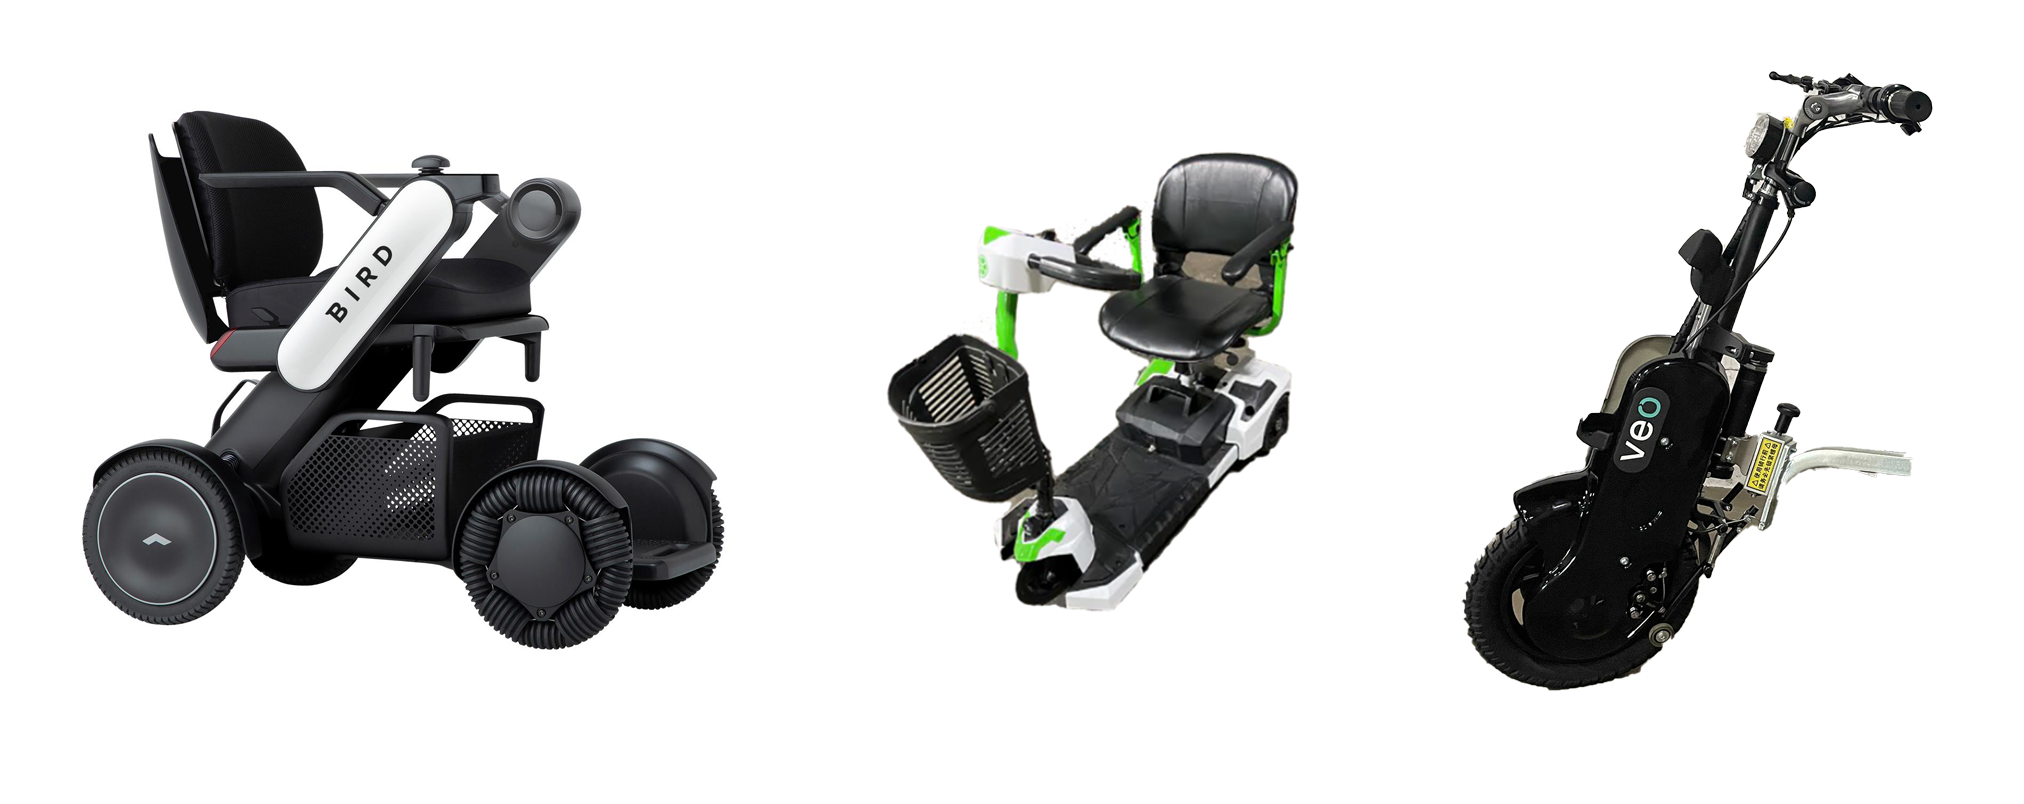 A photo of the options of adaptive or accessible vehicles and attachments offered by Bird, Lime, and Veo 